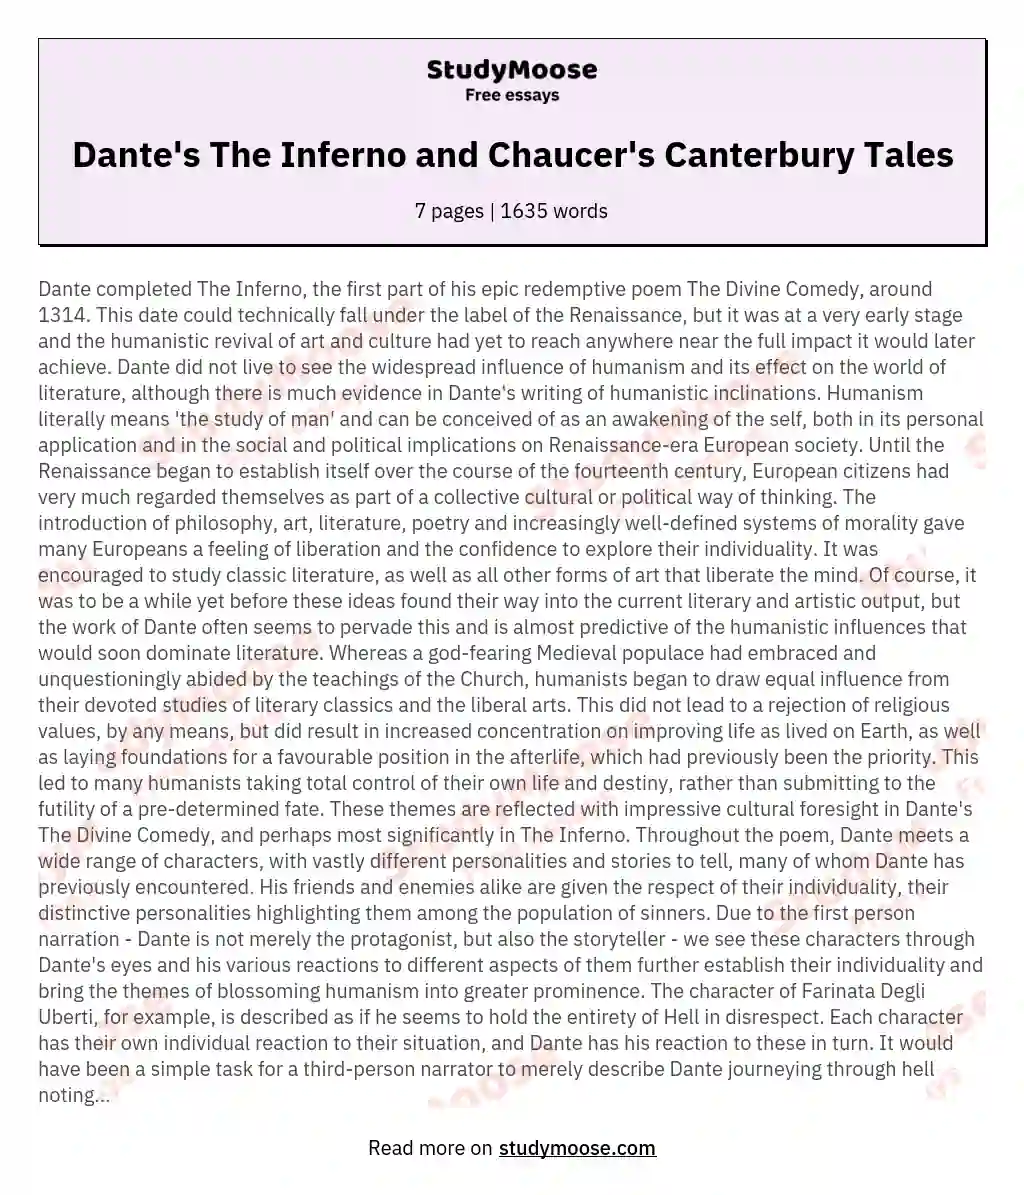 Dante's The Inferno and Chaucer's Canterbury Tales